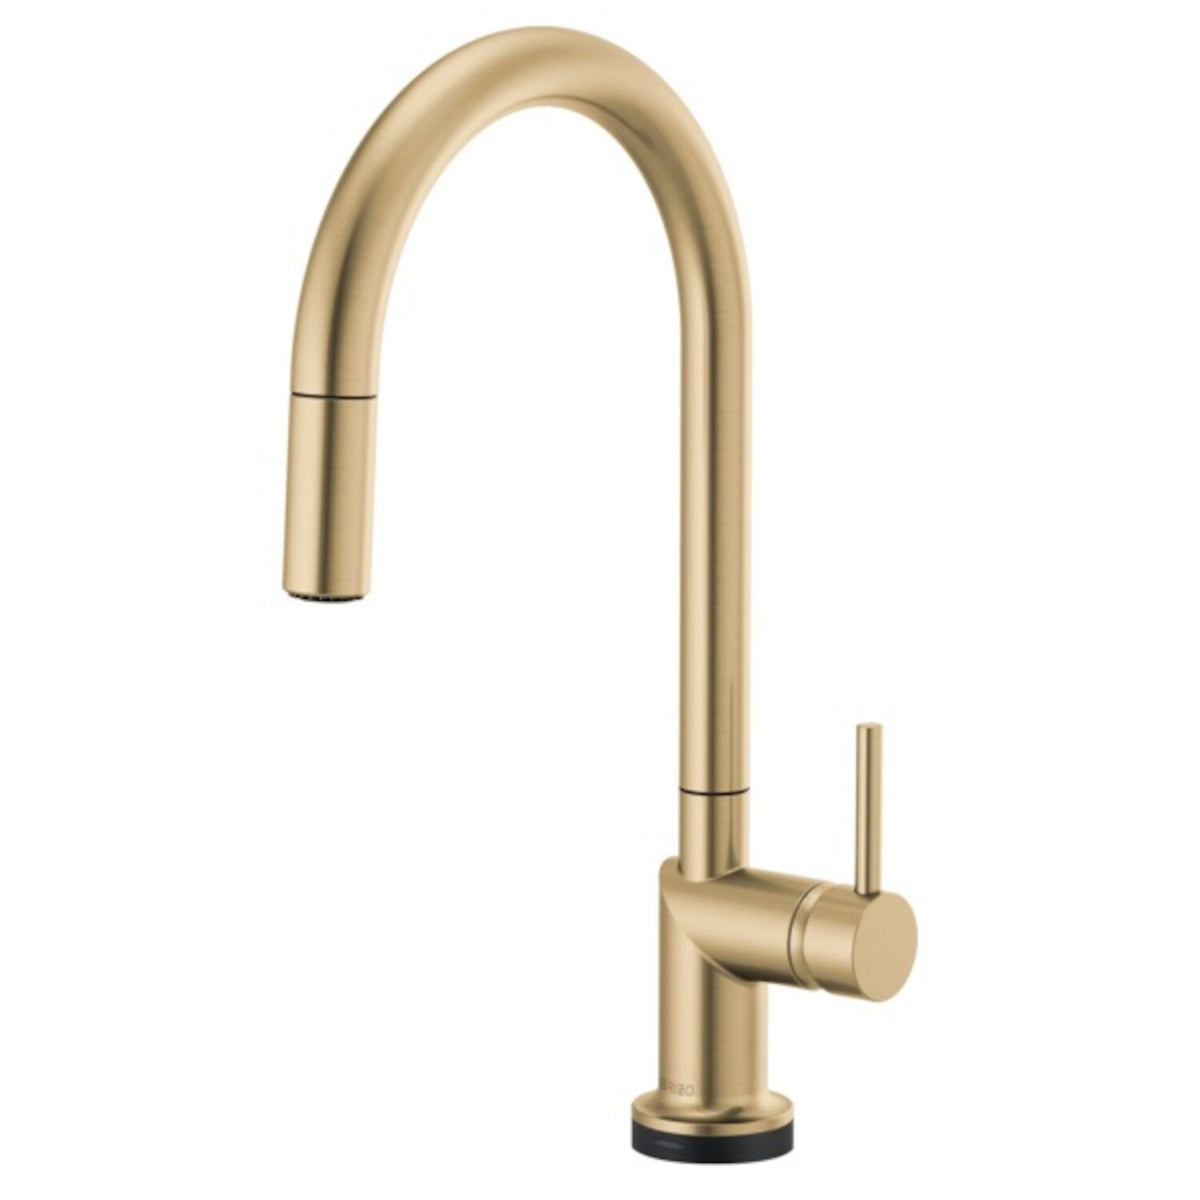 ODIN SMARTTOUCH® PULL-DOWN FAUCET WITH ARC SPOUT - LESS HANDLE